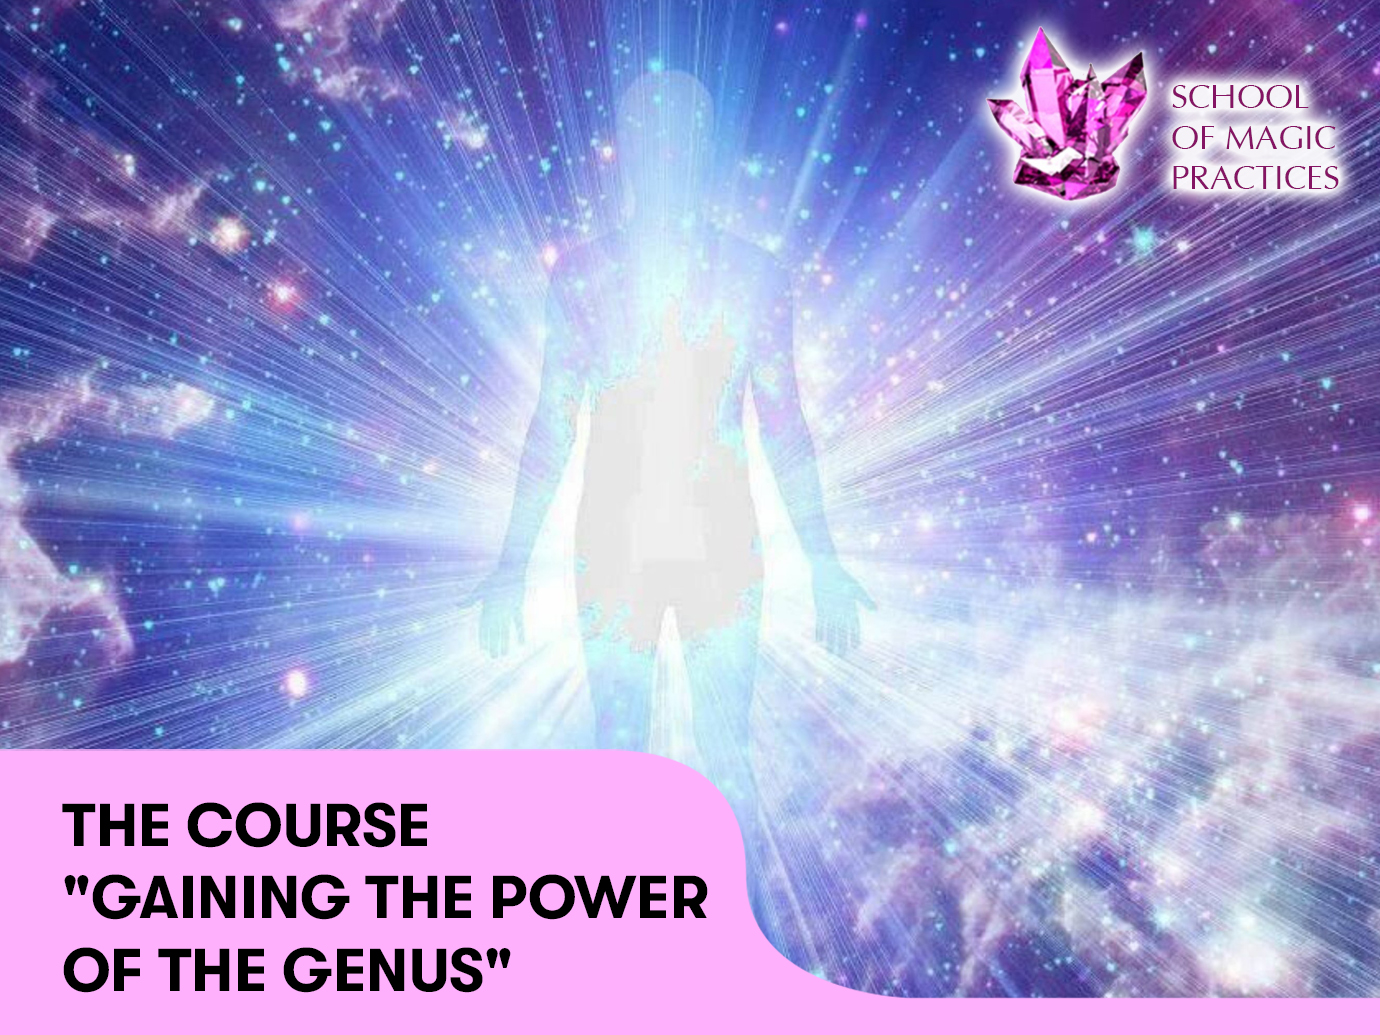 The course “Gaining the power of the genus